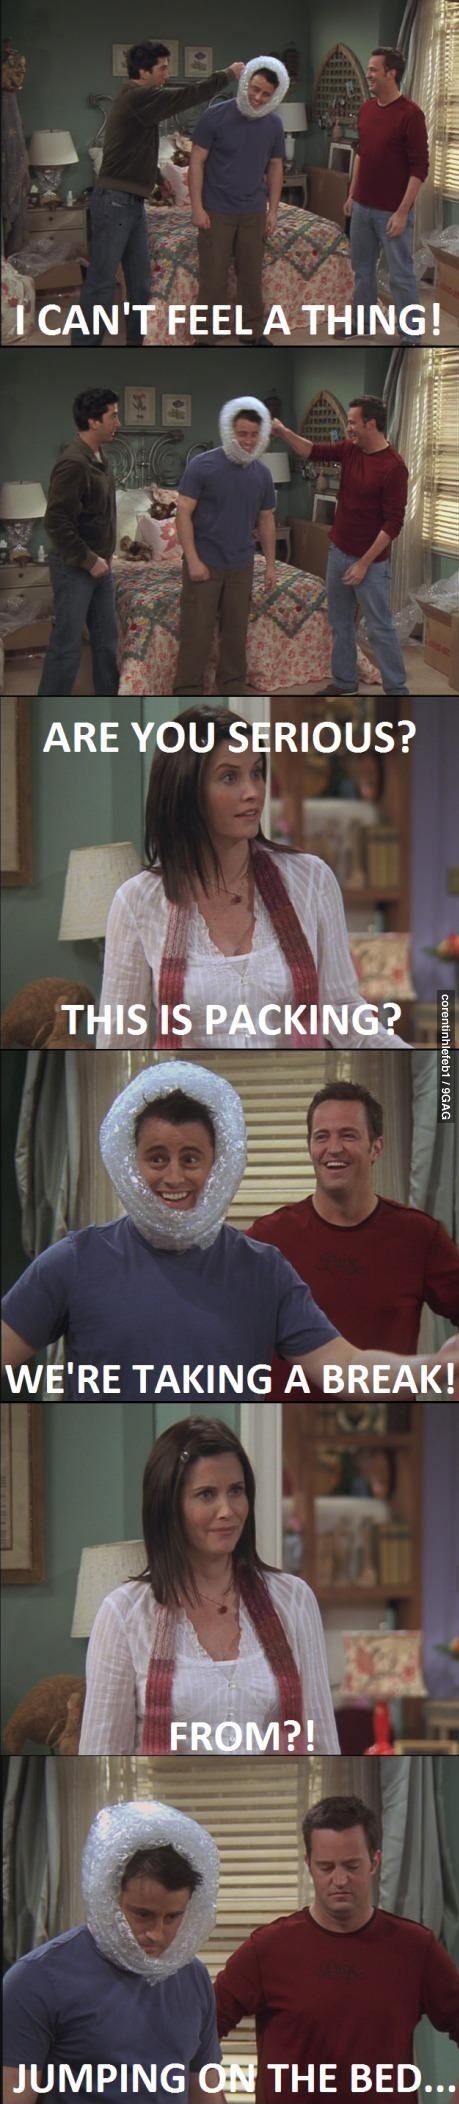 joey packing